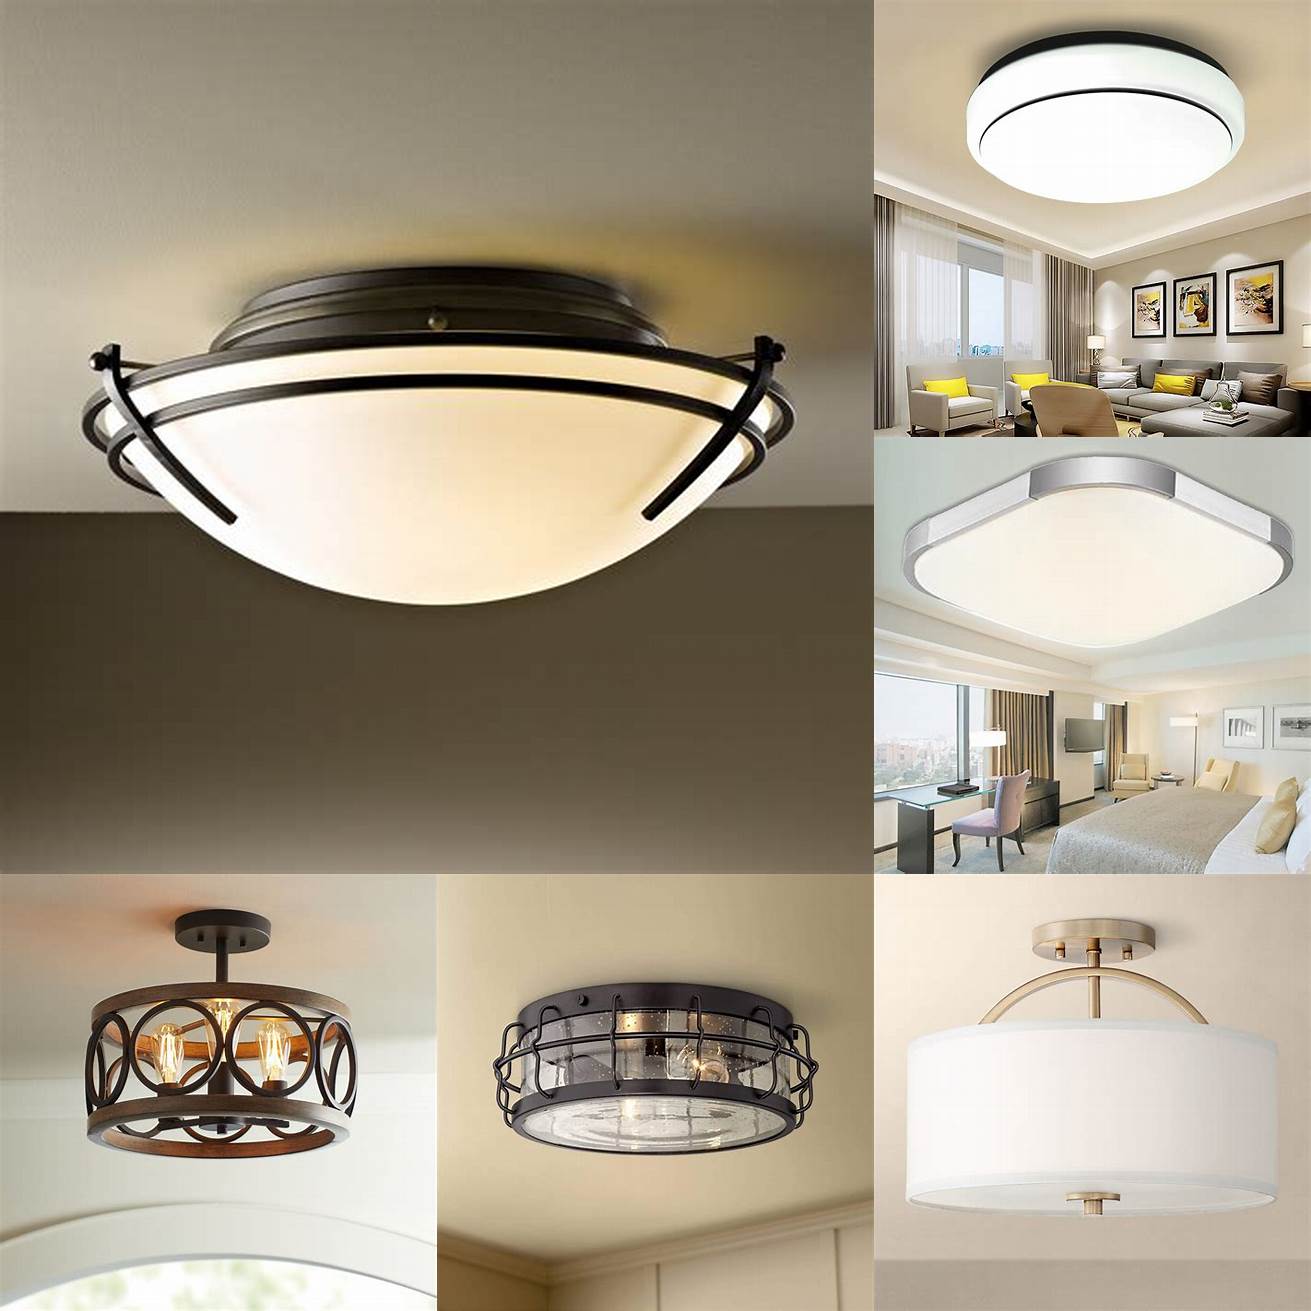 Ceiling-Mounted Fixtures